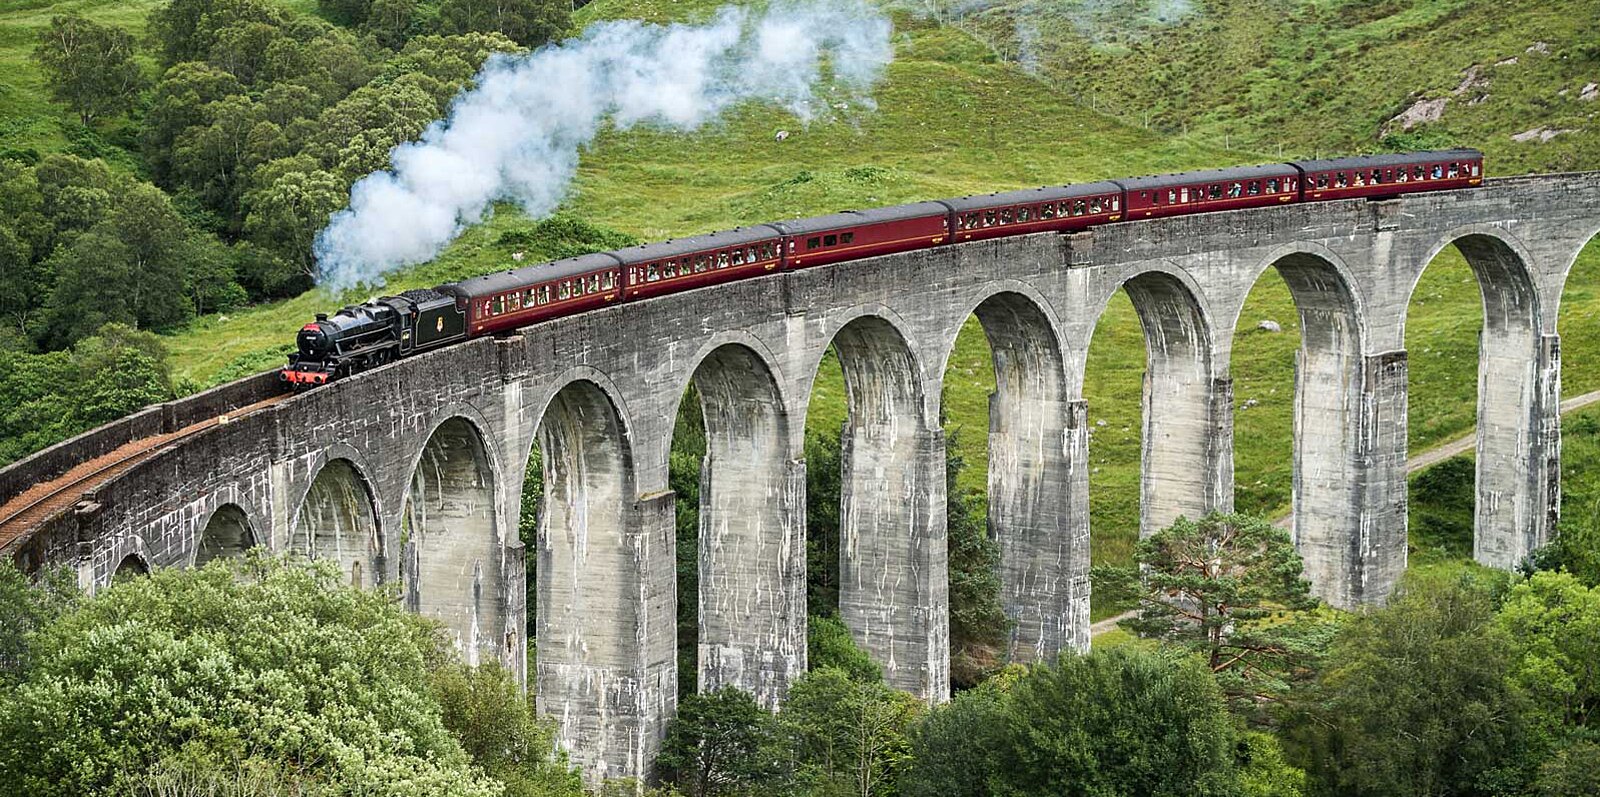 Harry Potter Fans Can Tour The Scottish Countryside On A Real Life Hogwarts Express. Travel + Leisure